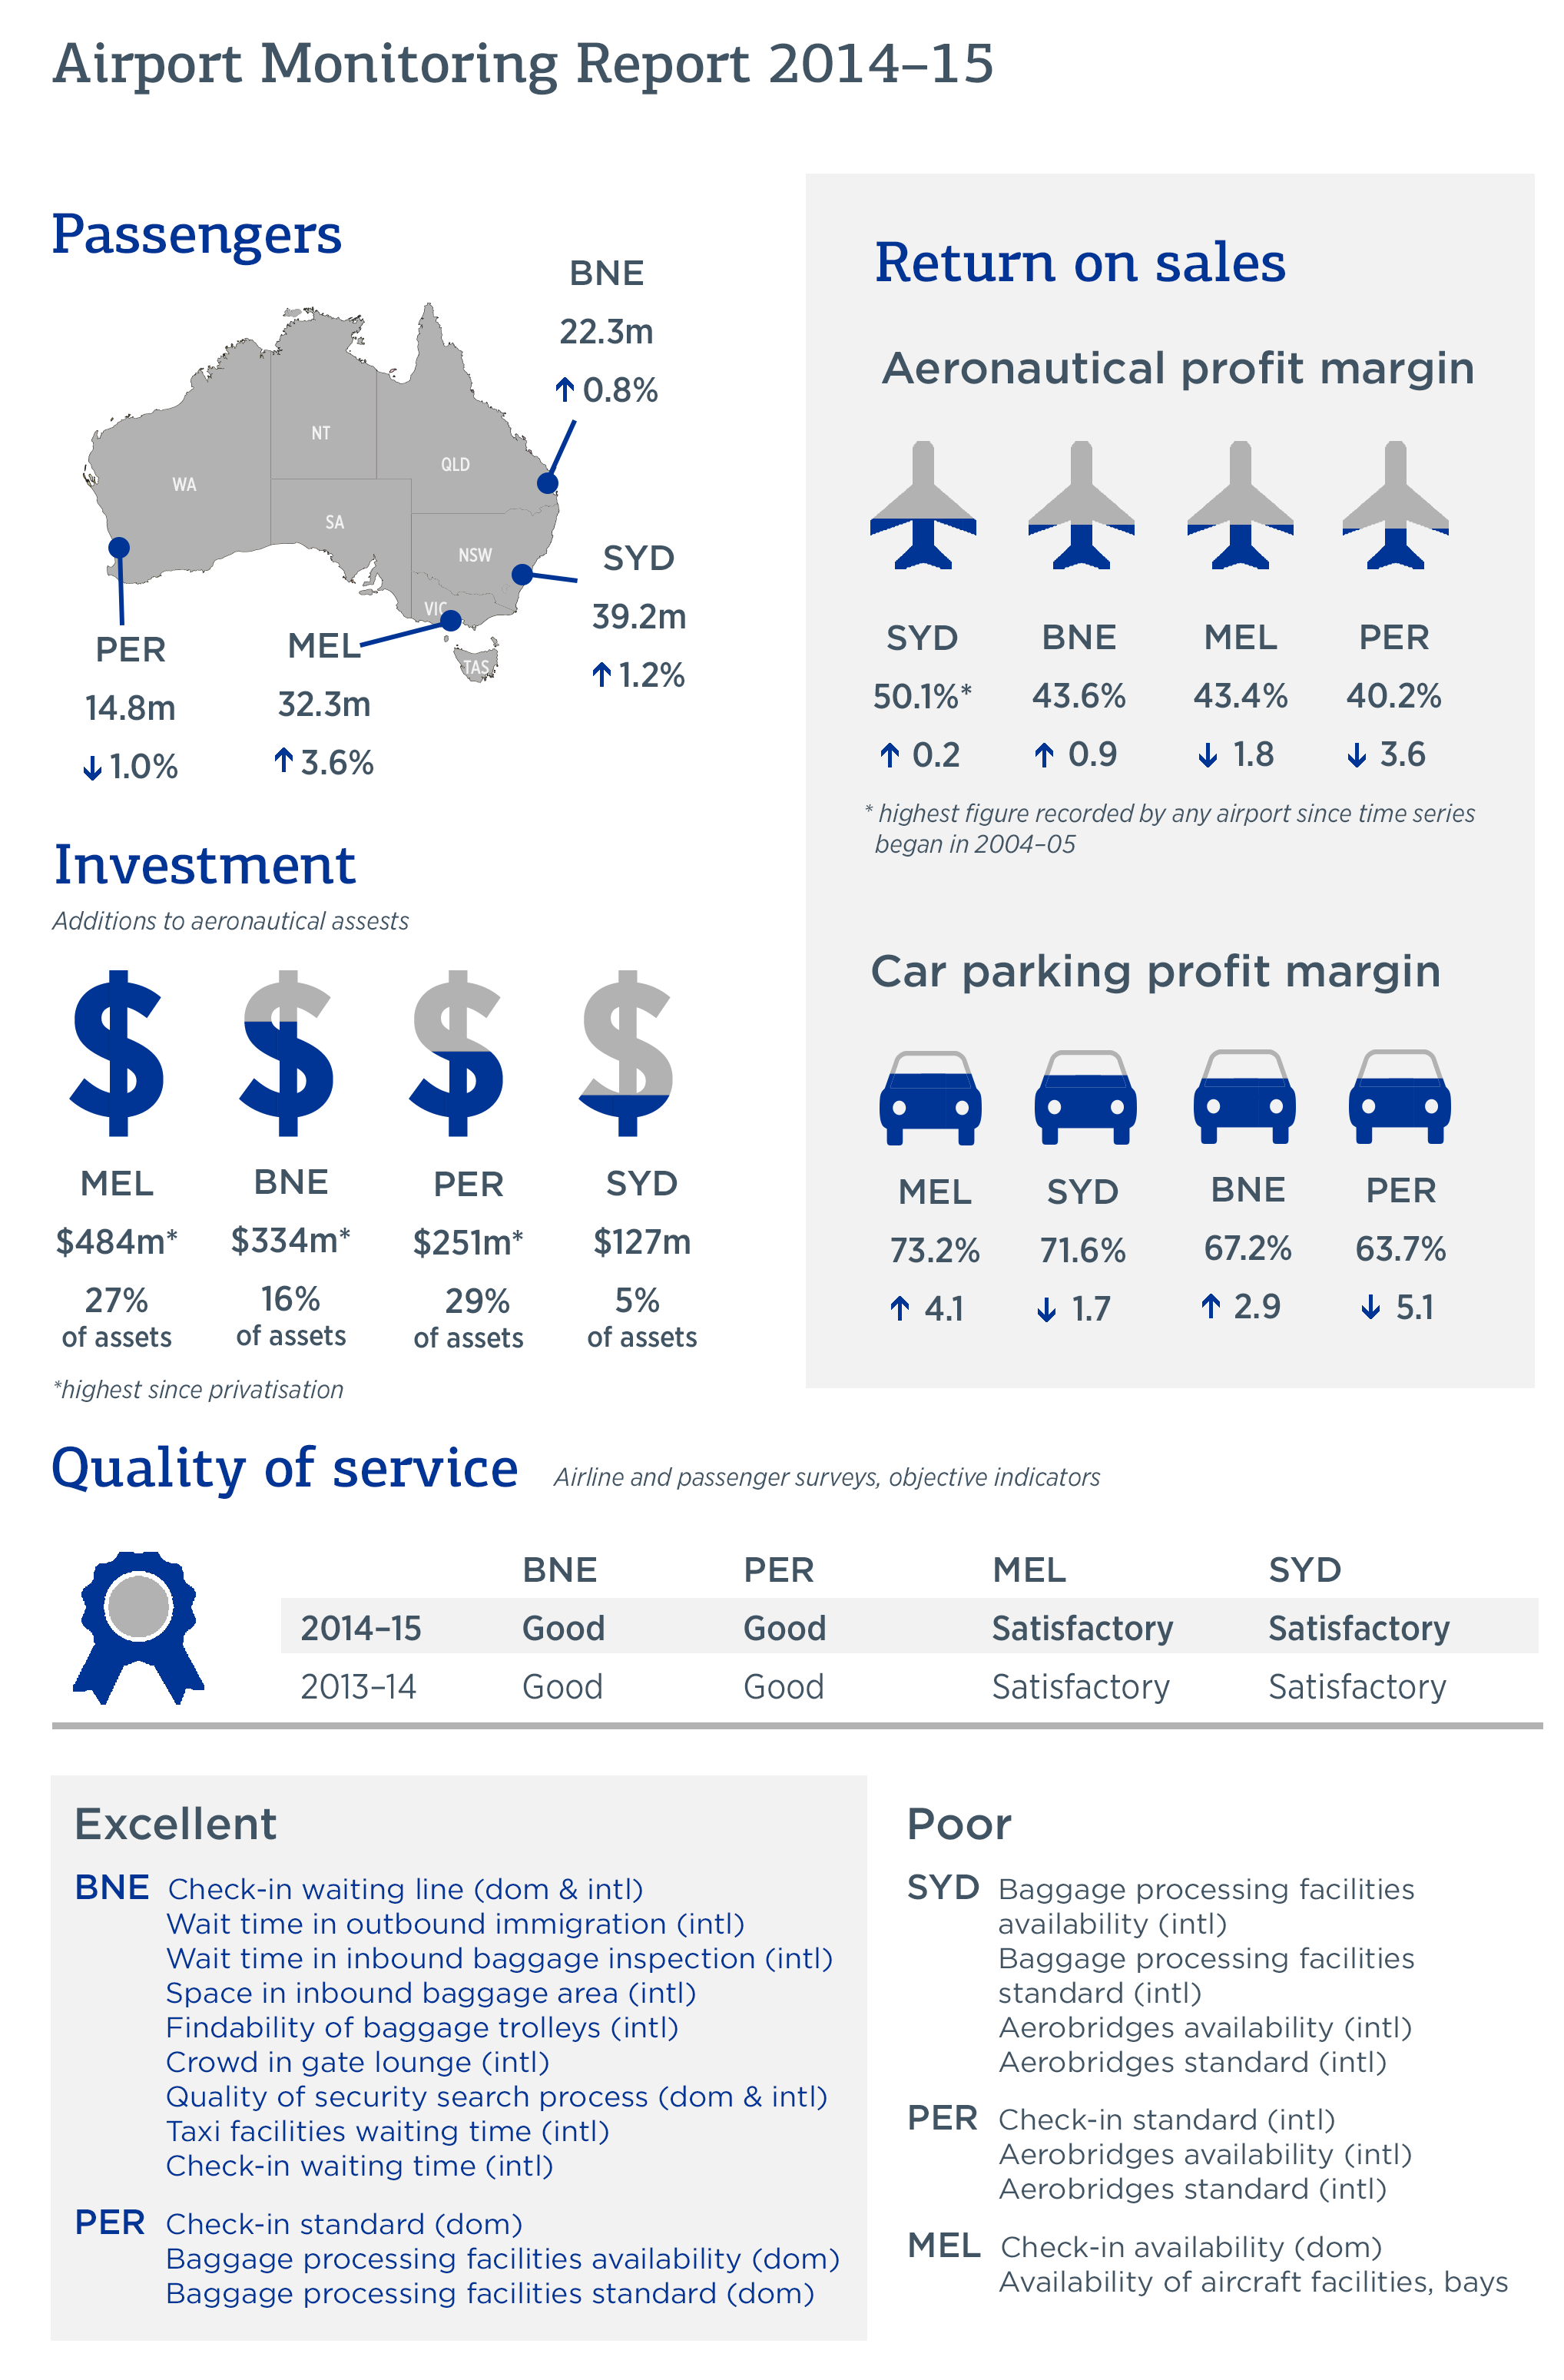 Airport monitoring report 2014-15 - Infographic